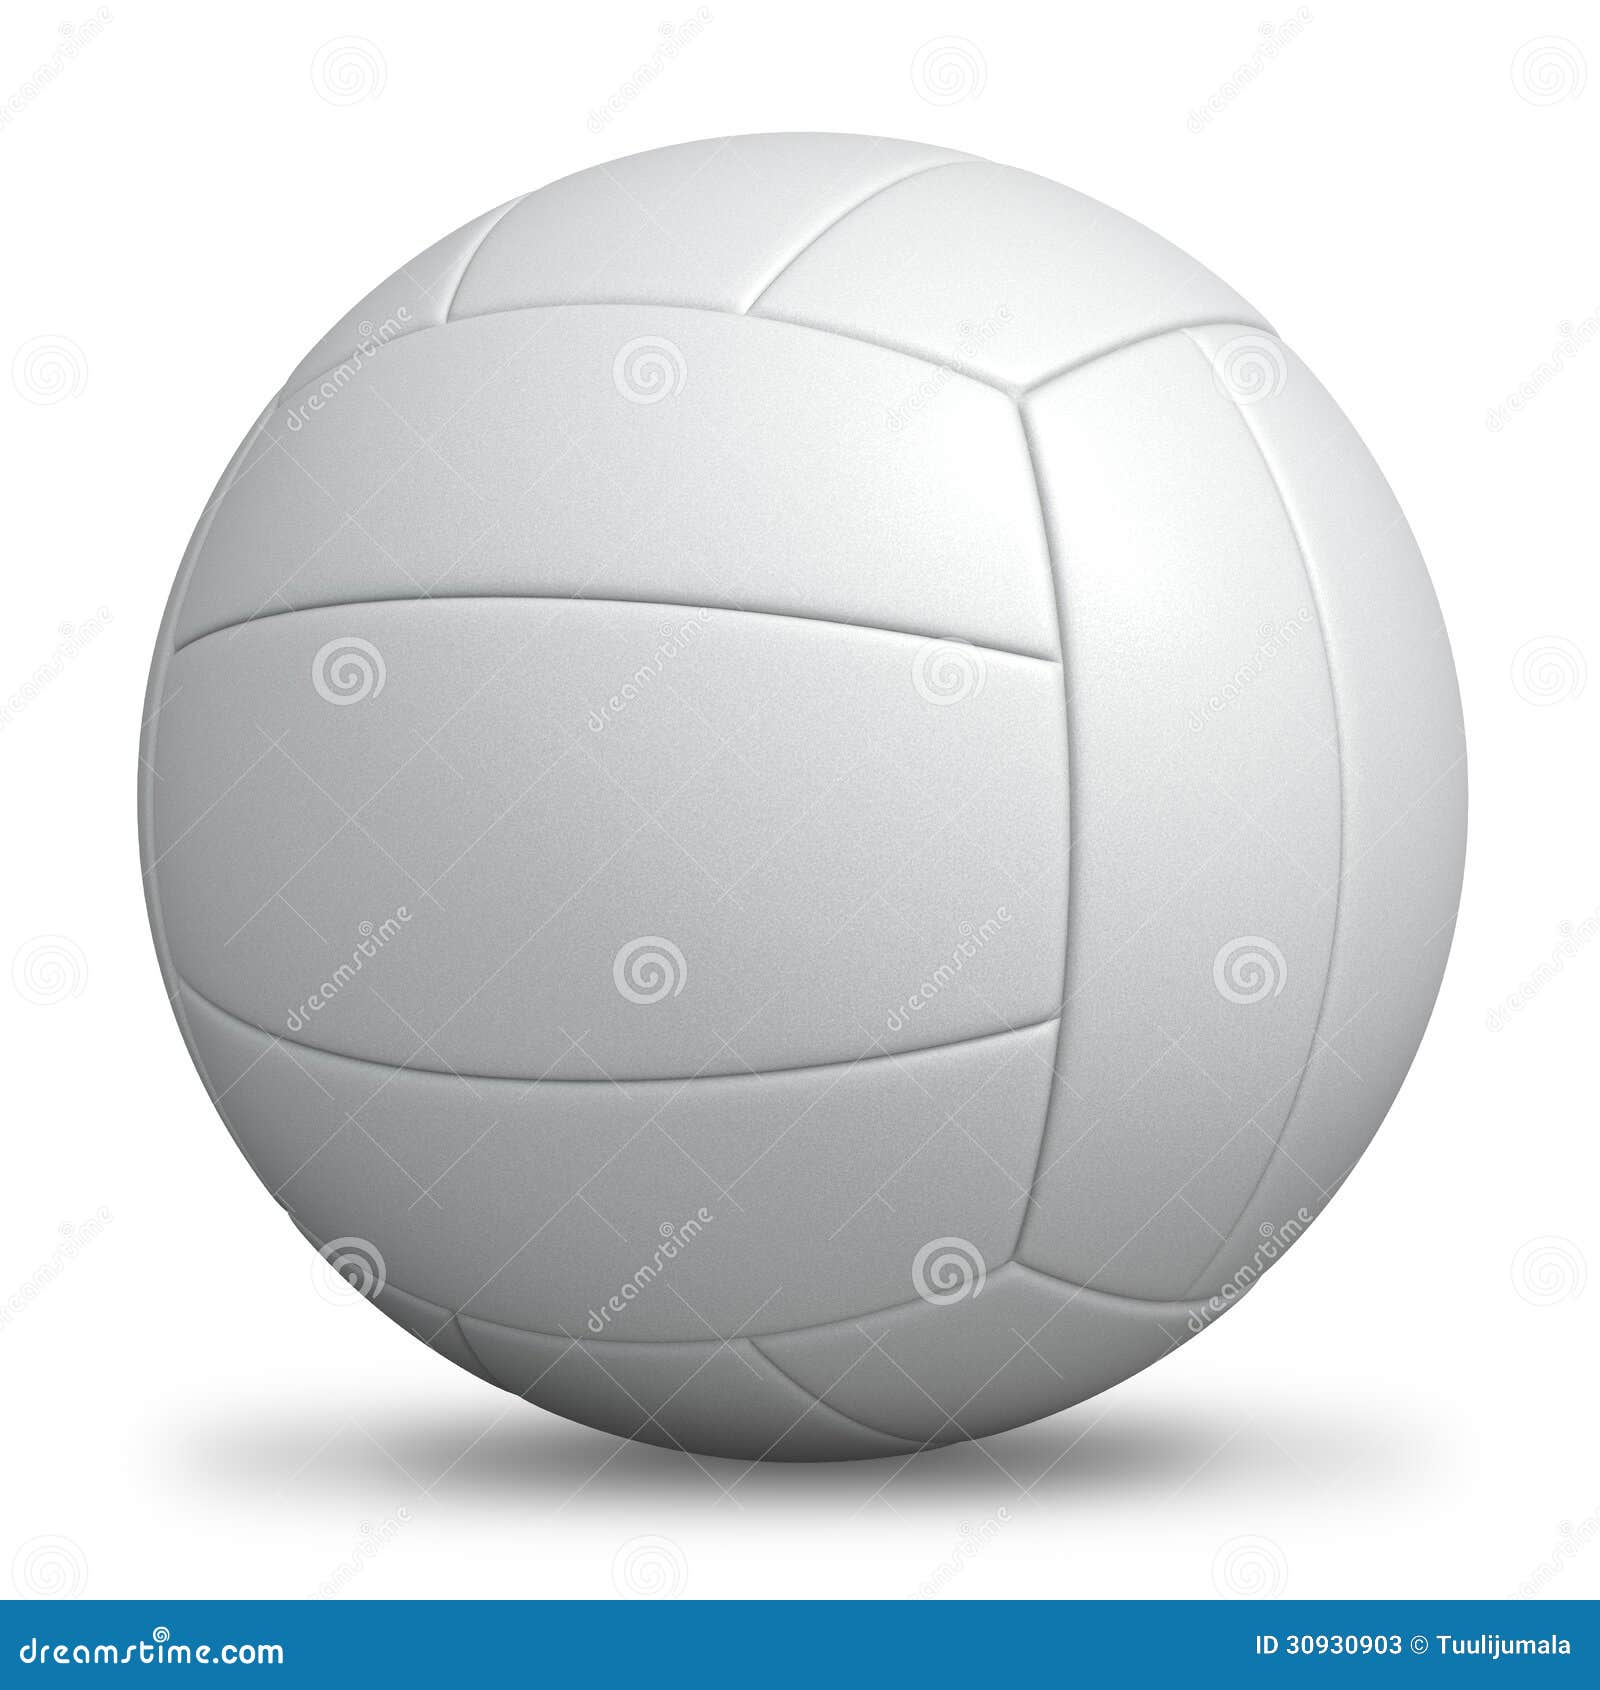 volleyball clipart with no background - photo #25